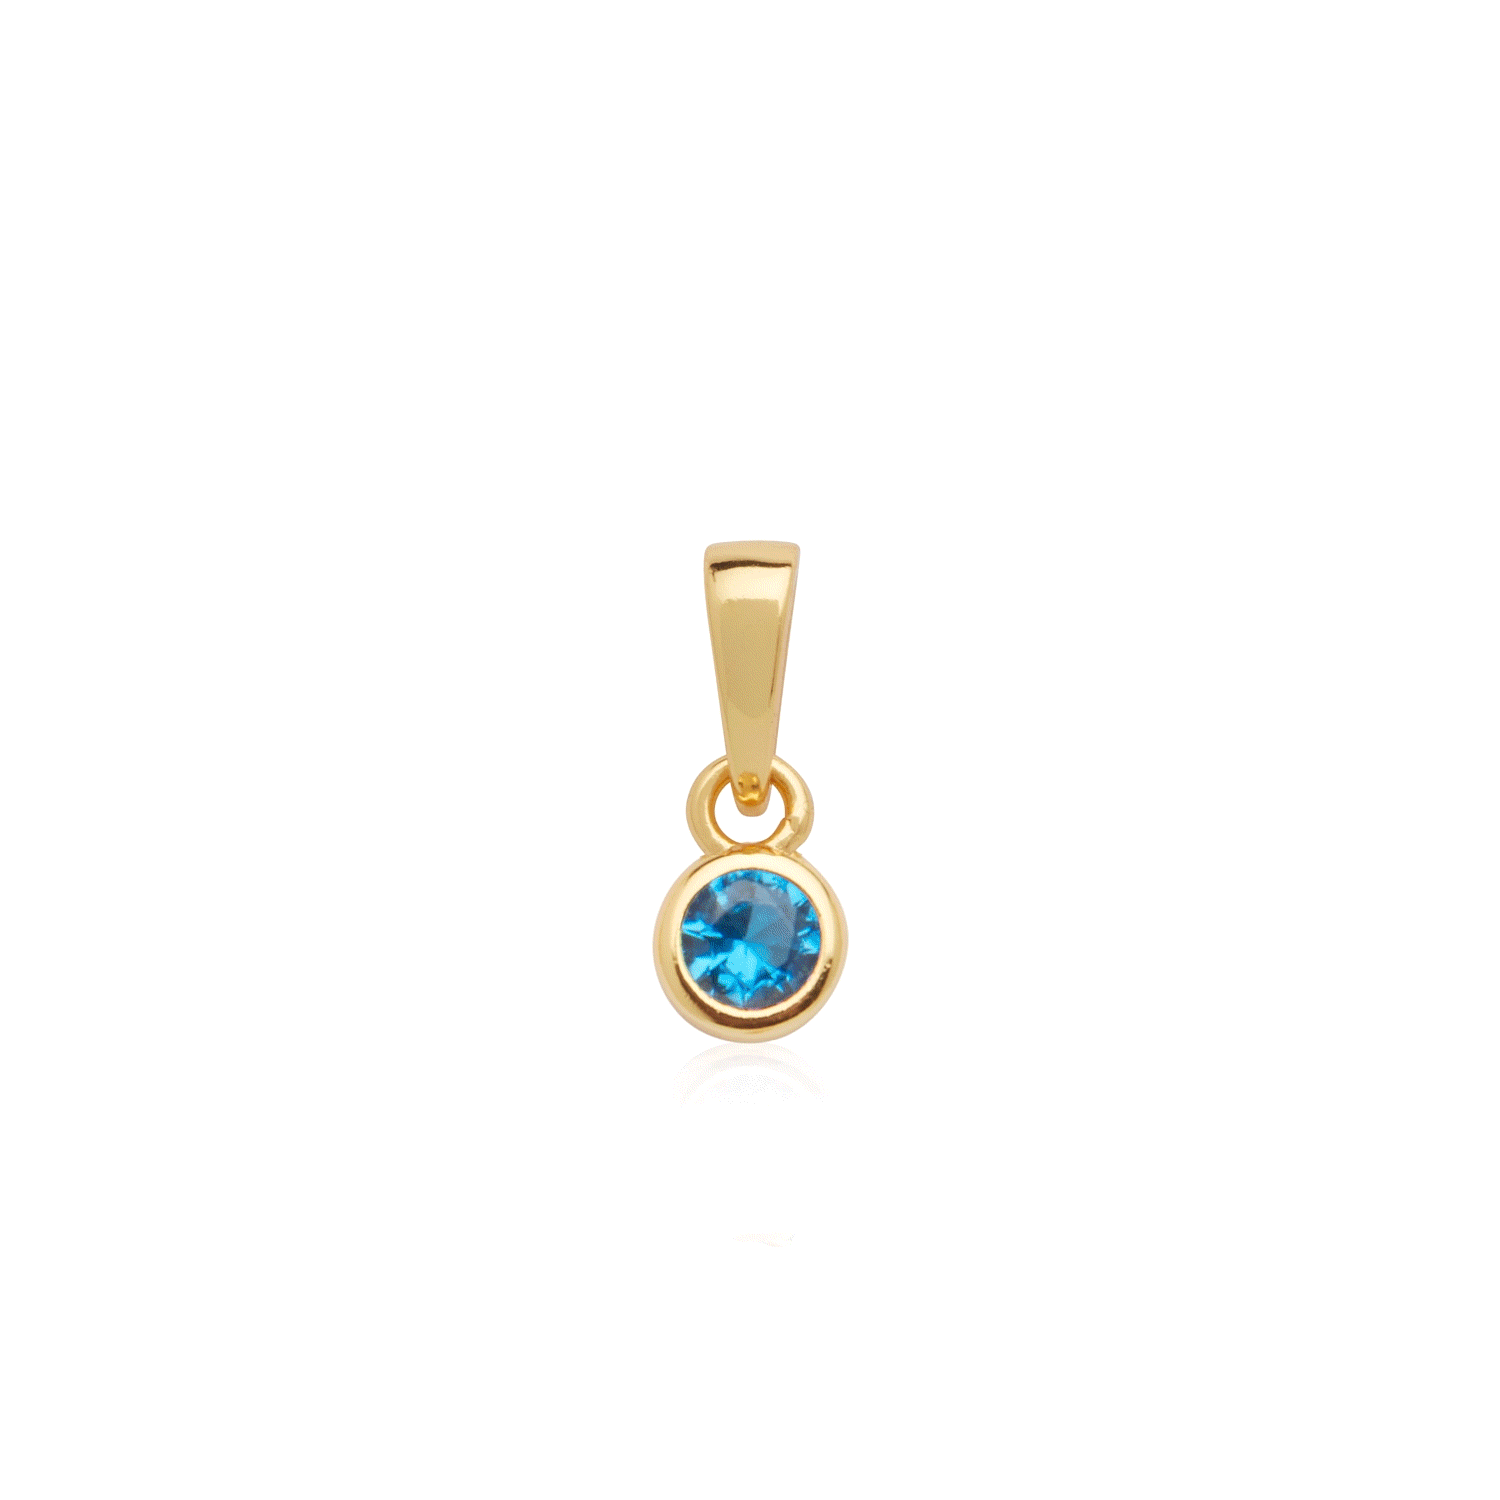 Stacey's Stories Initial & Birthstone Necklace (Gold)